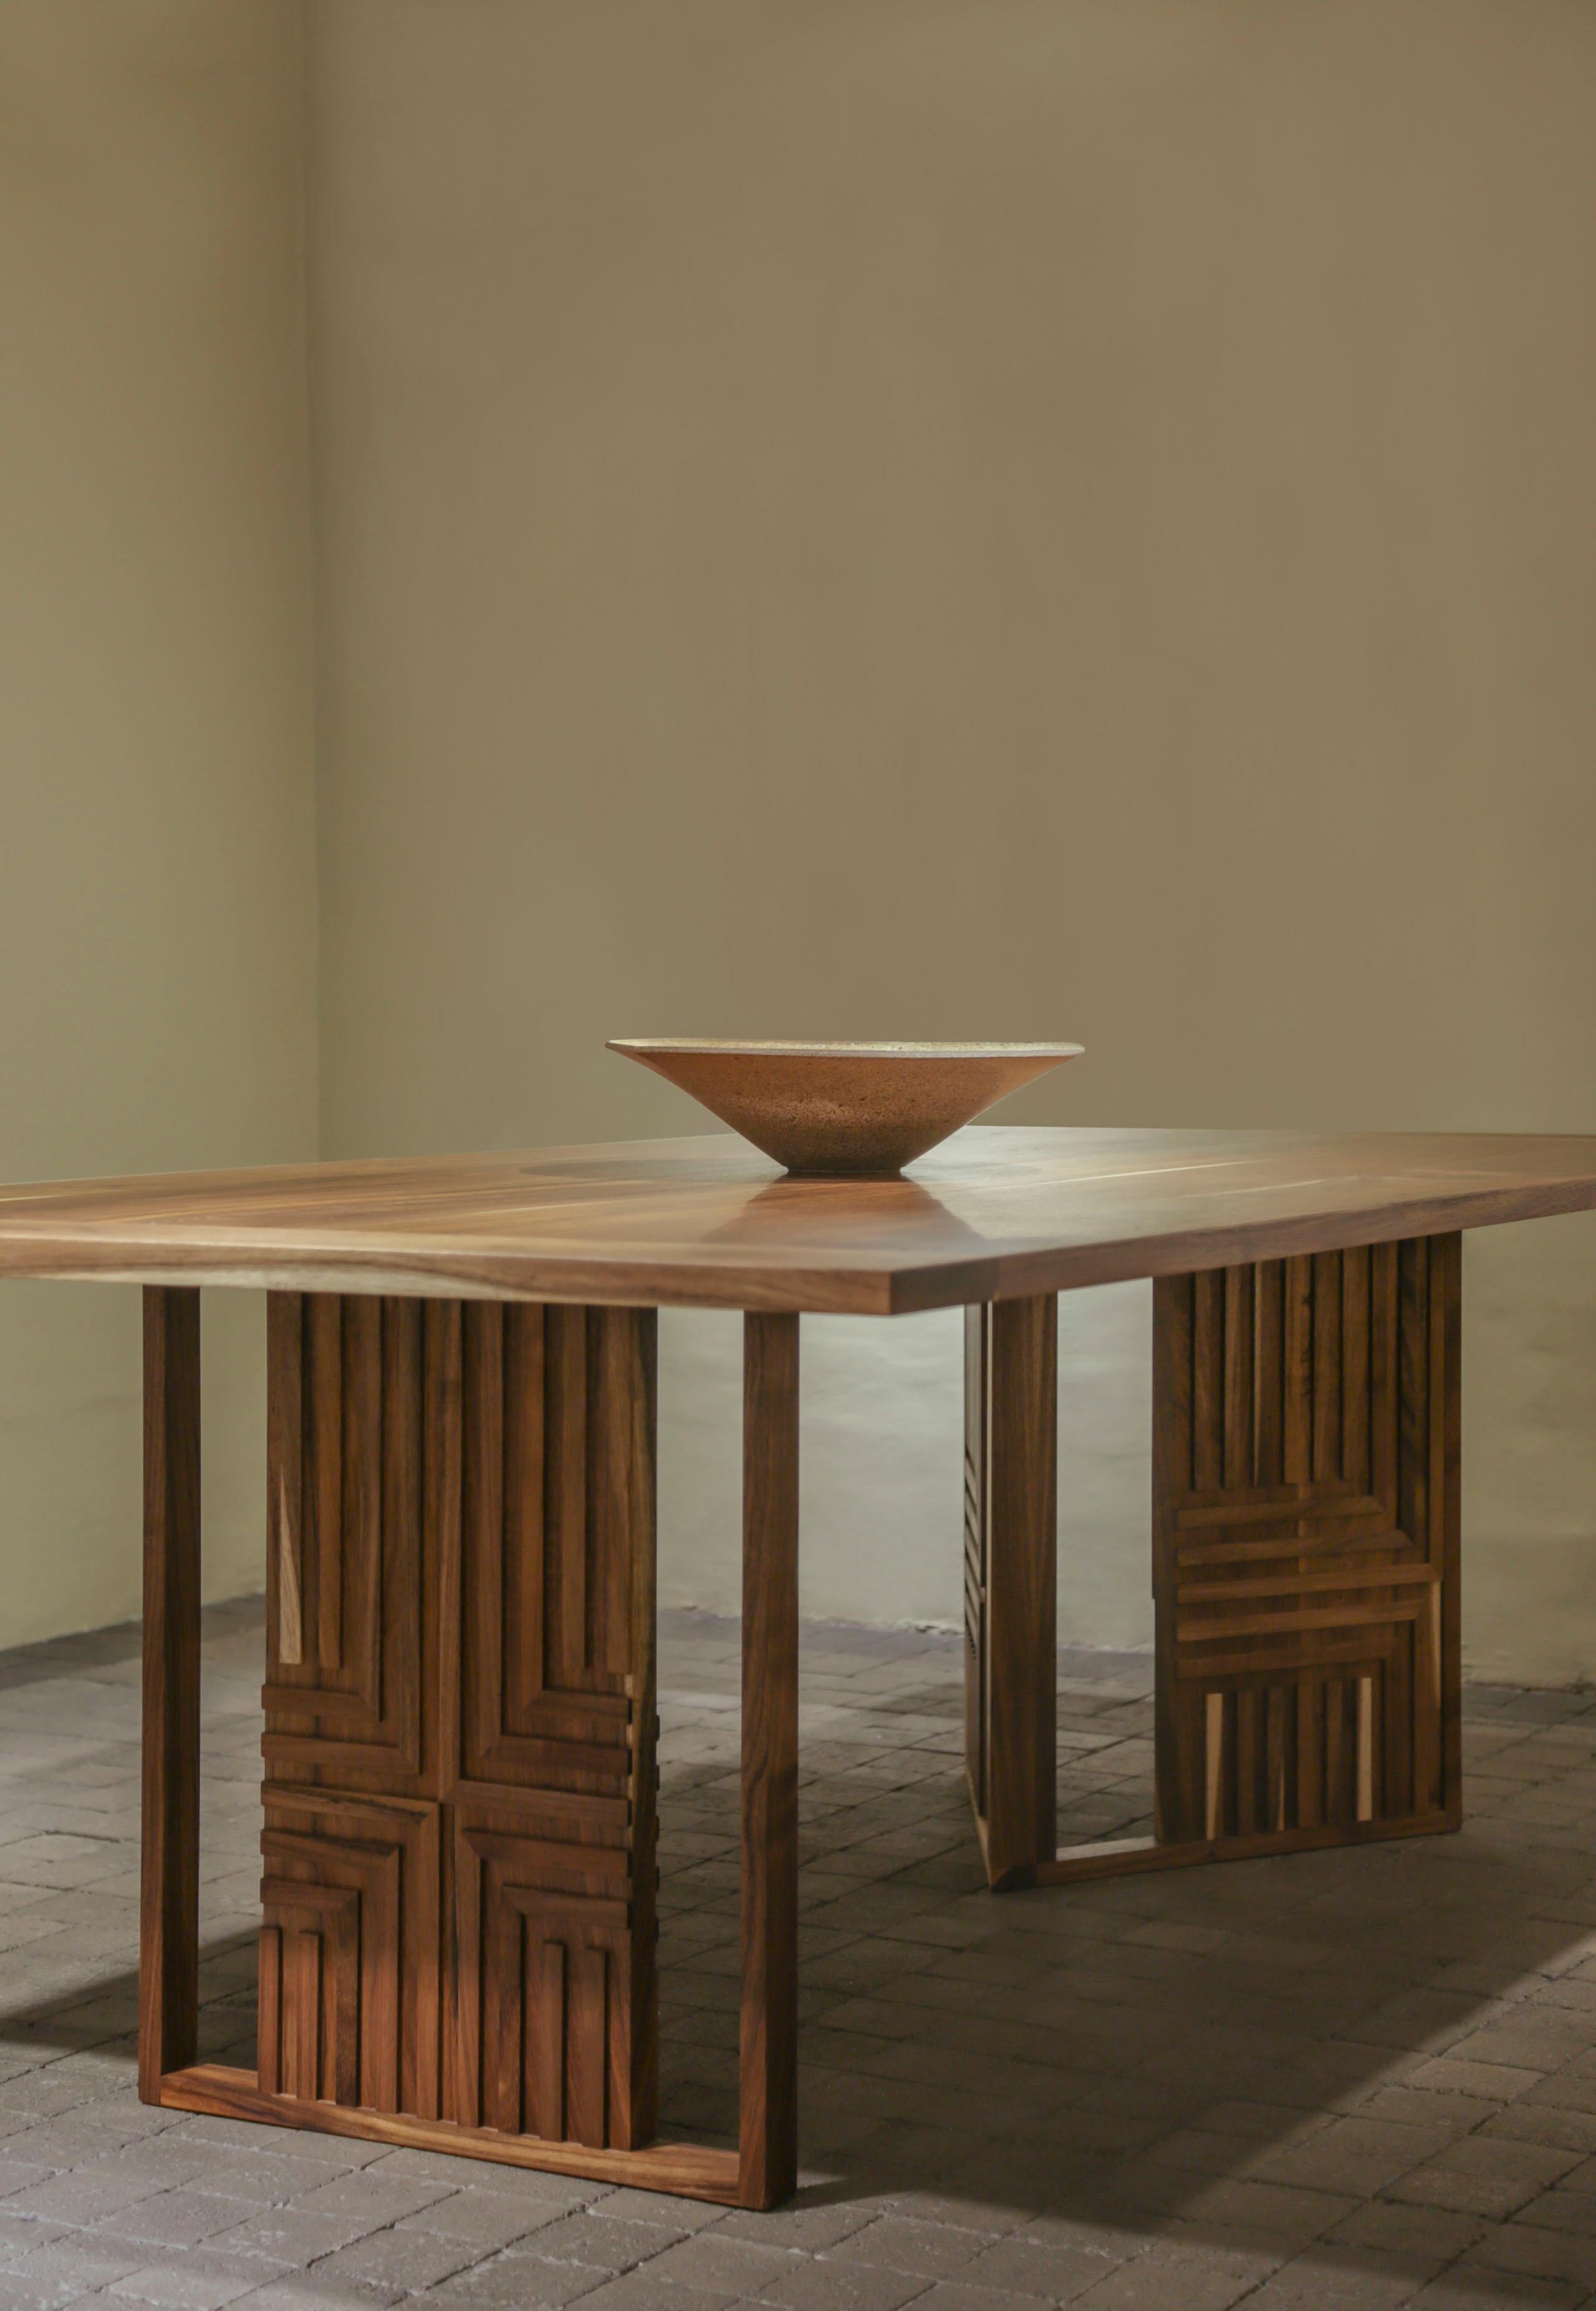 Introducing an extraordinary piece of functional art – the artisanal-crafted Paz table from the limited Rutsu Collection. Immerse yourself in the breathtaking detail of the woodwork, meticulously designed to create a true centerpiece for your